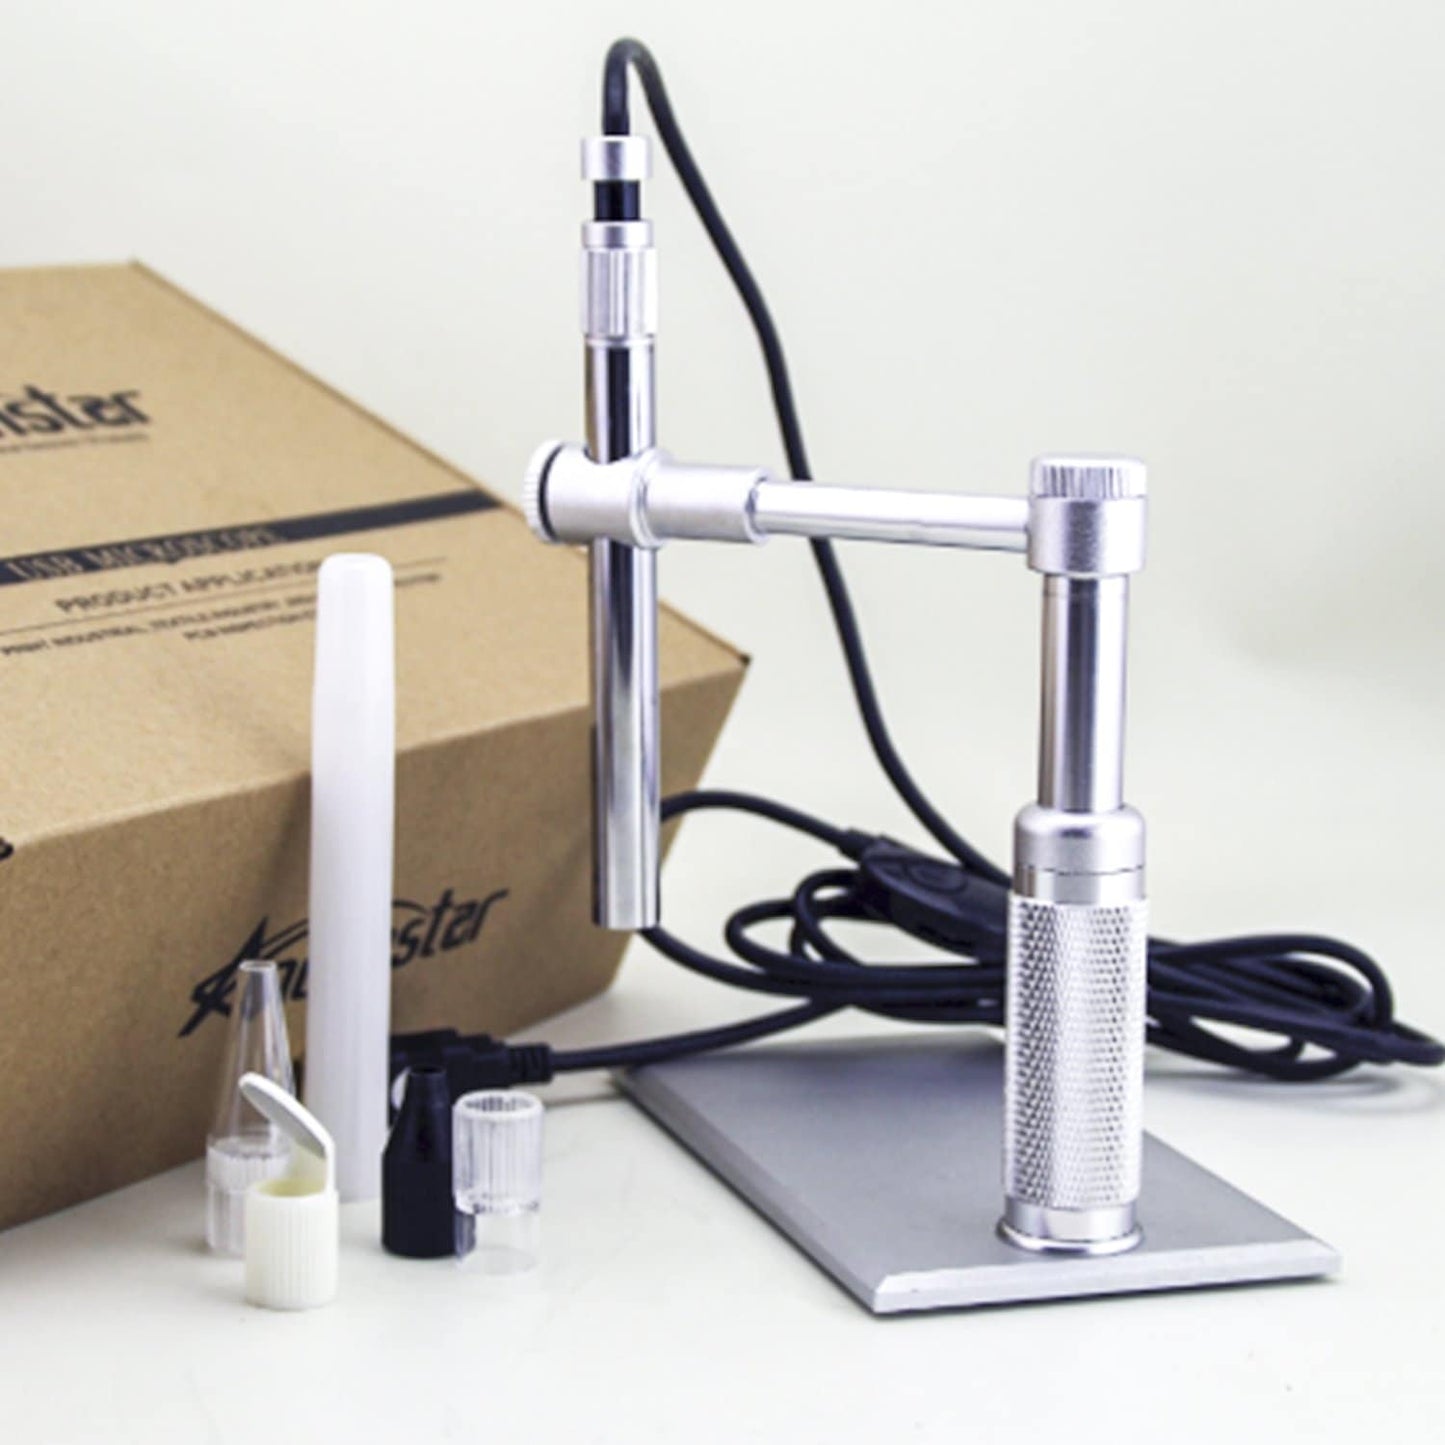 Andonstar A1 500X USB Digital Microscope with Measuring Software for PCB Repair